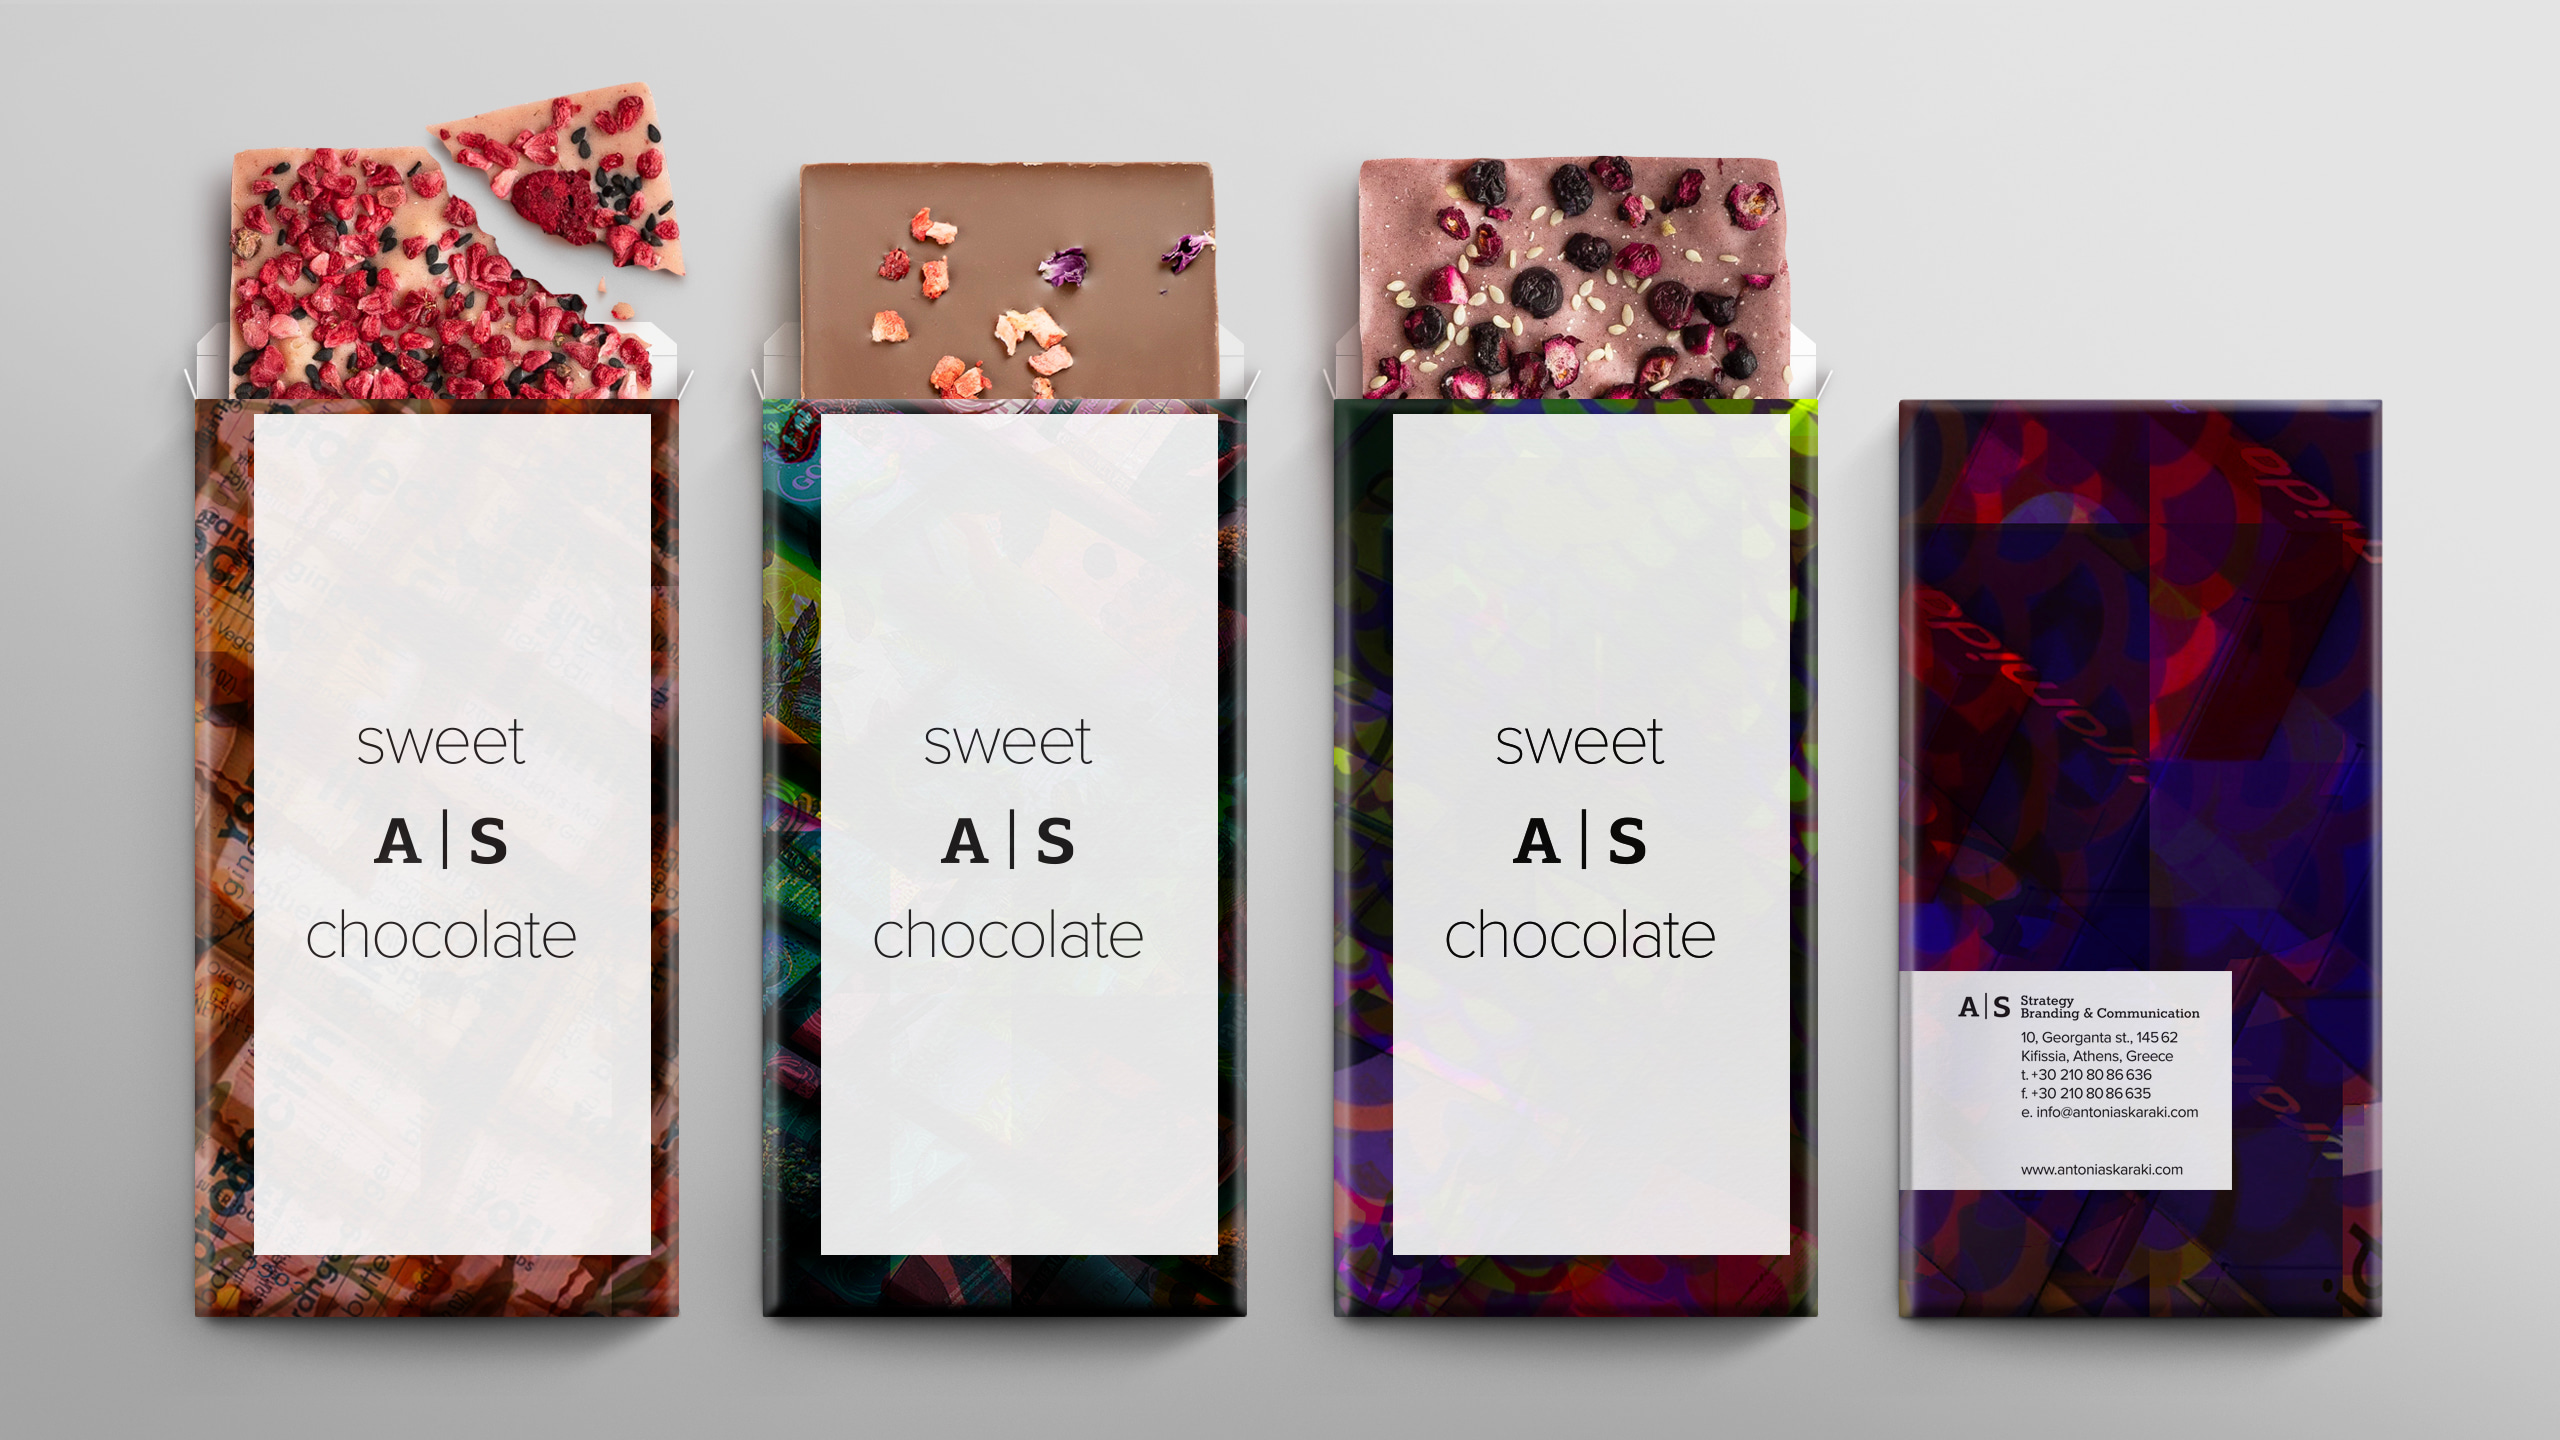 AS Chocolate Repurposing Print Waste and Crafting Eco-Friendly Chocolate Packaging